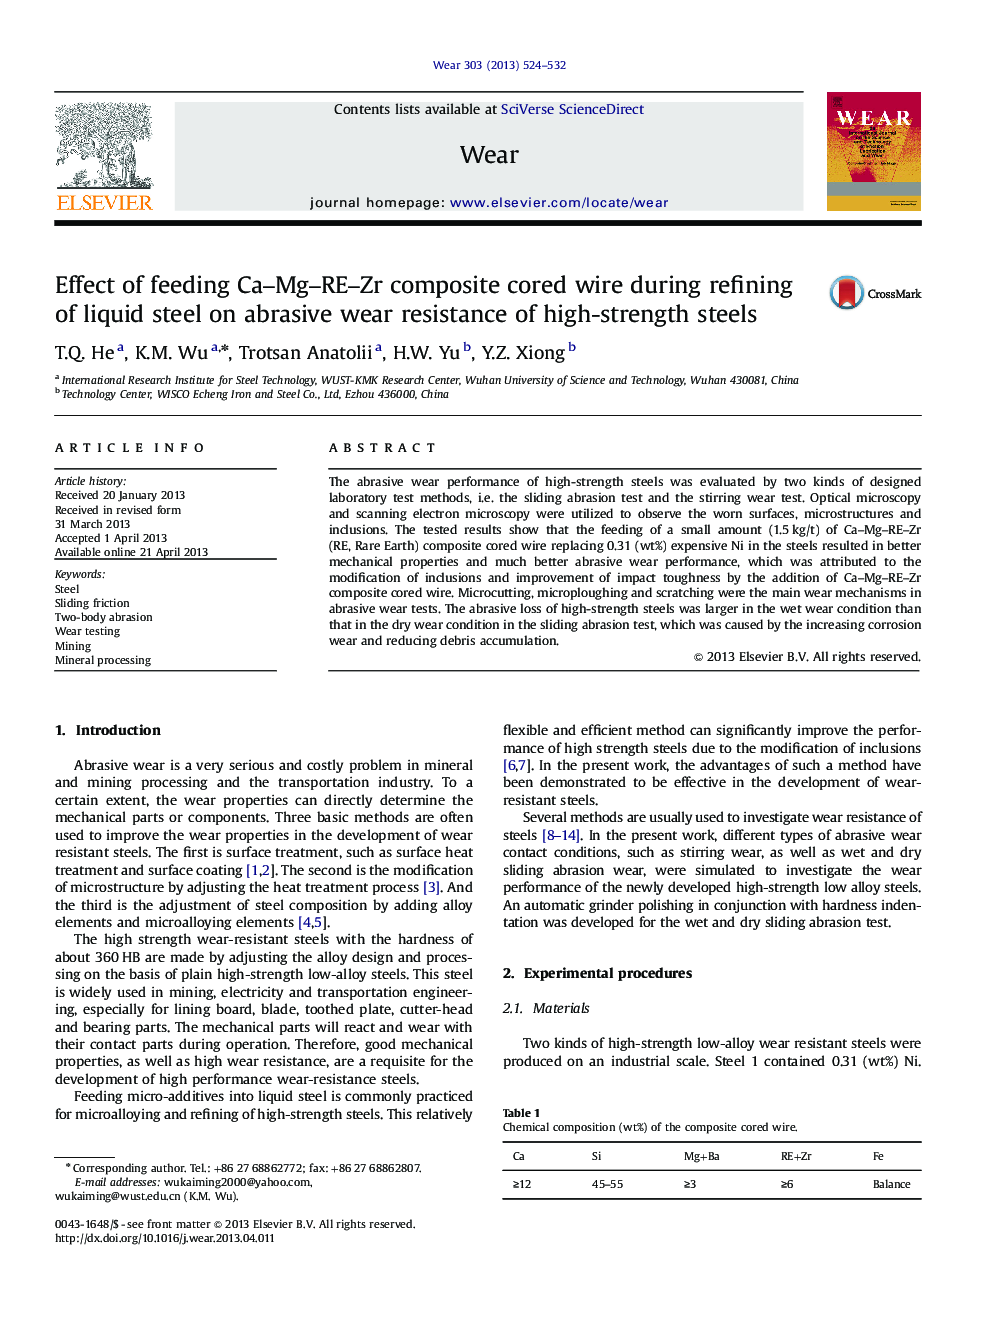 Effect of feeding Ca-Mg-RE-Zr composite cored wire during refining of liquid steel on abrasive wear resistance of high-strength steels